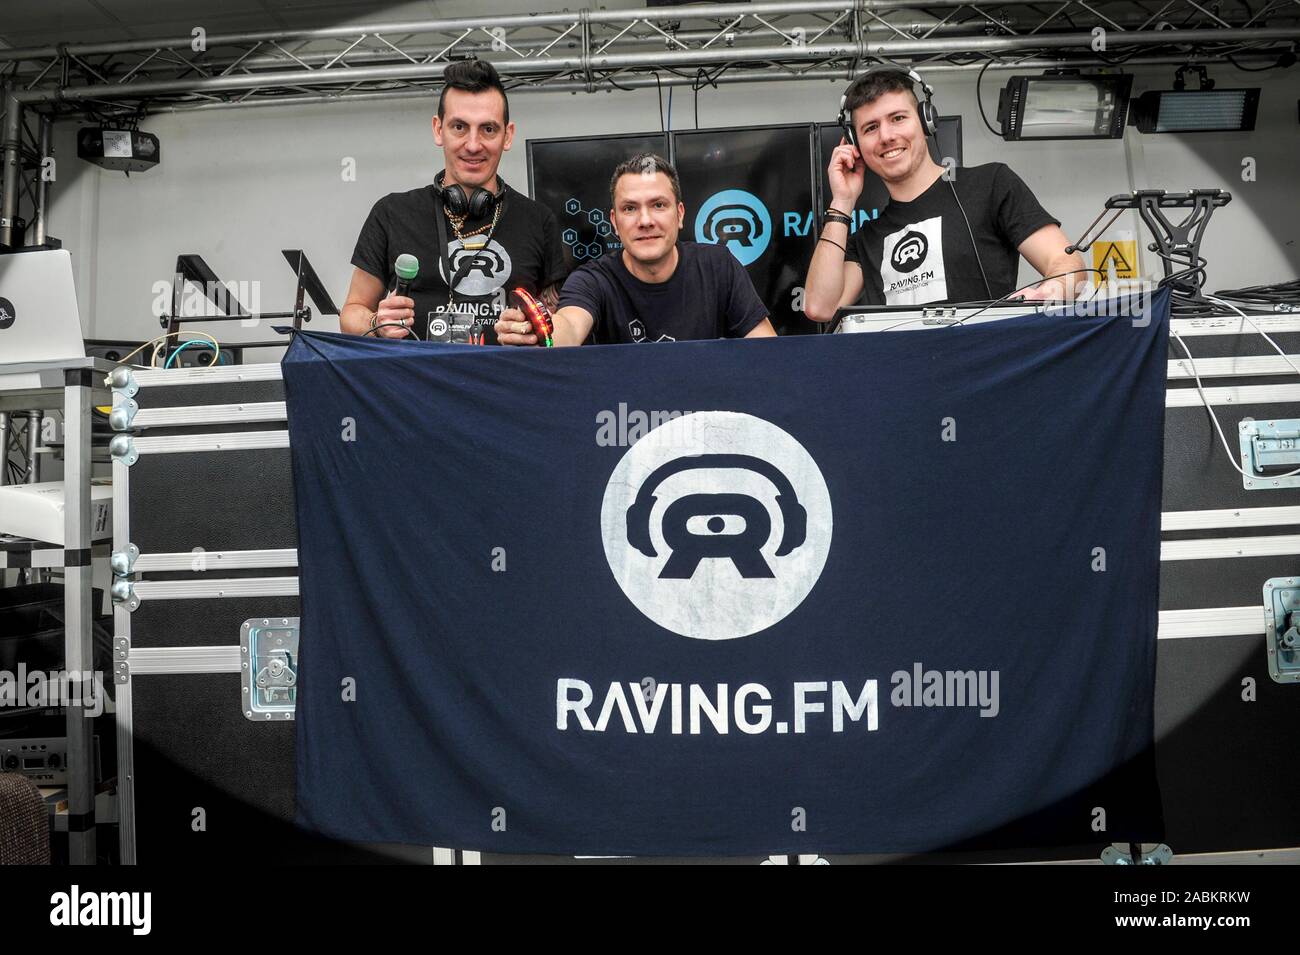 Leonardo Javier Garcia (l.) and Juan Pablo Toculescu (r.) from the Munich techno  web radio station "Raving.fm", recorded in their studio in a former print  shop in Untergiesing. In the middle Andreas